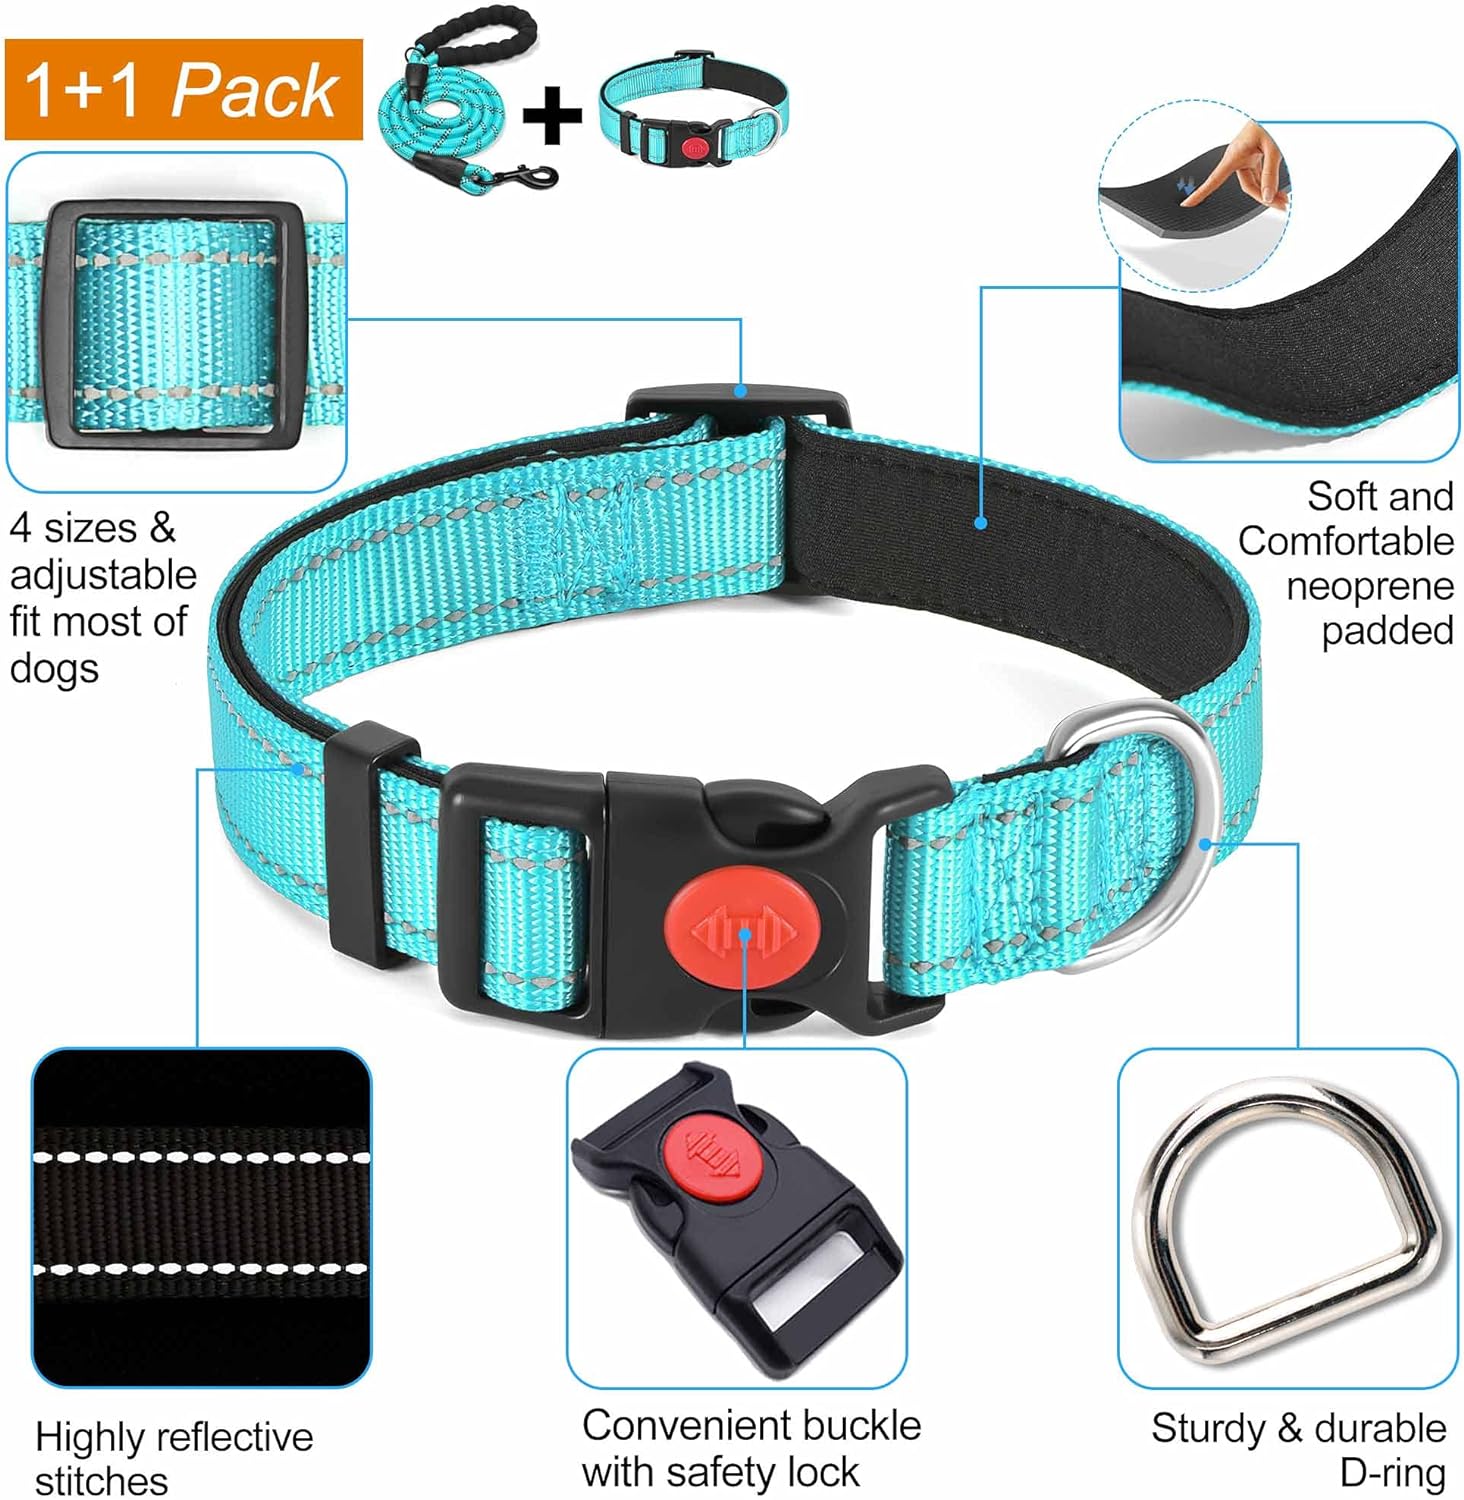 haapaw 2 Packs Martingale Dog Collar with Quick Release Buckle Reflective Dog Training Collars for Small Medium Large Dogs